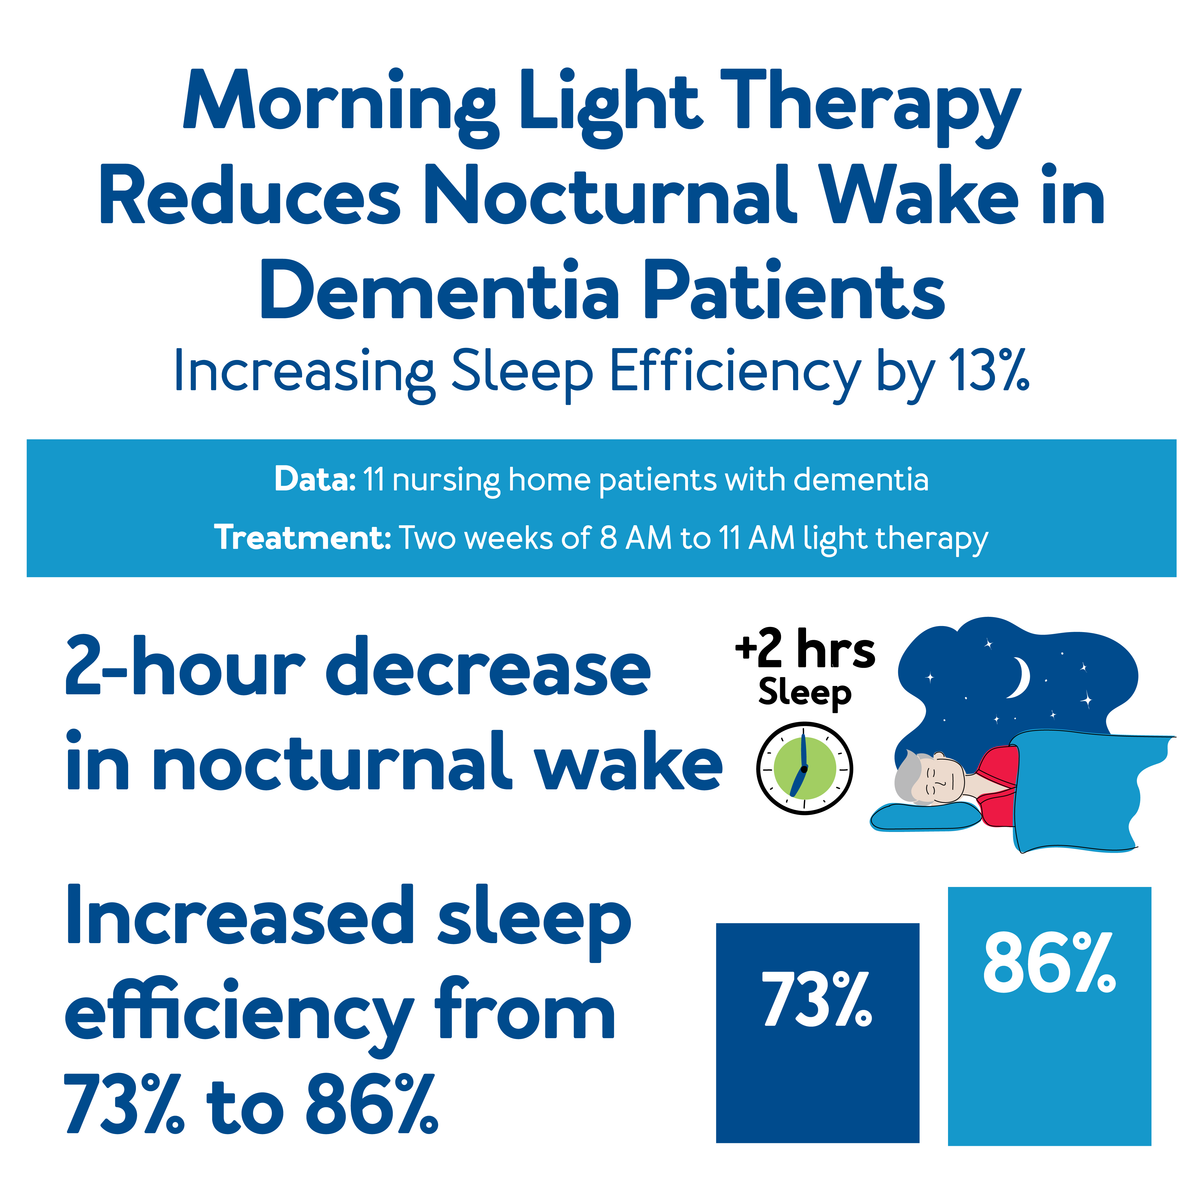 Morning Light Therapy Reduces Nocturnal Wake in Dementia Patients, further details are provided below.